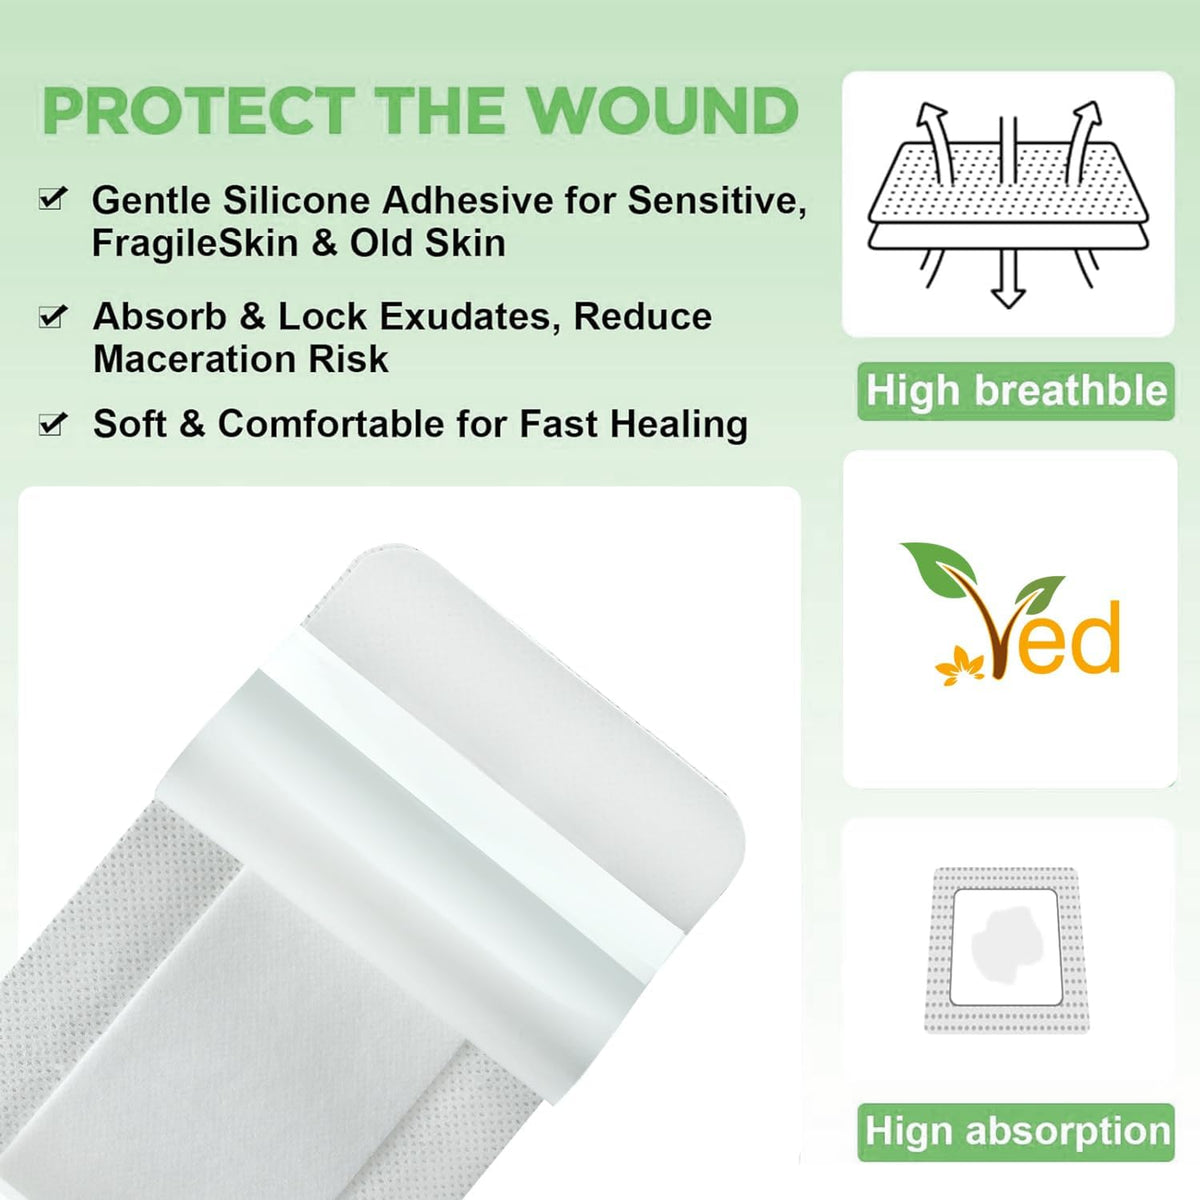 VED Dermapore Adhesive Wound Dressing- Suitable for cuts and grazes, Diabetic Leg ulcers, venous Leg ulcers, Small Pressure sores- Medium, 9 x 10cm (Pack of 50).